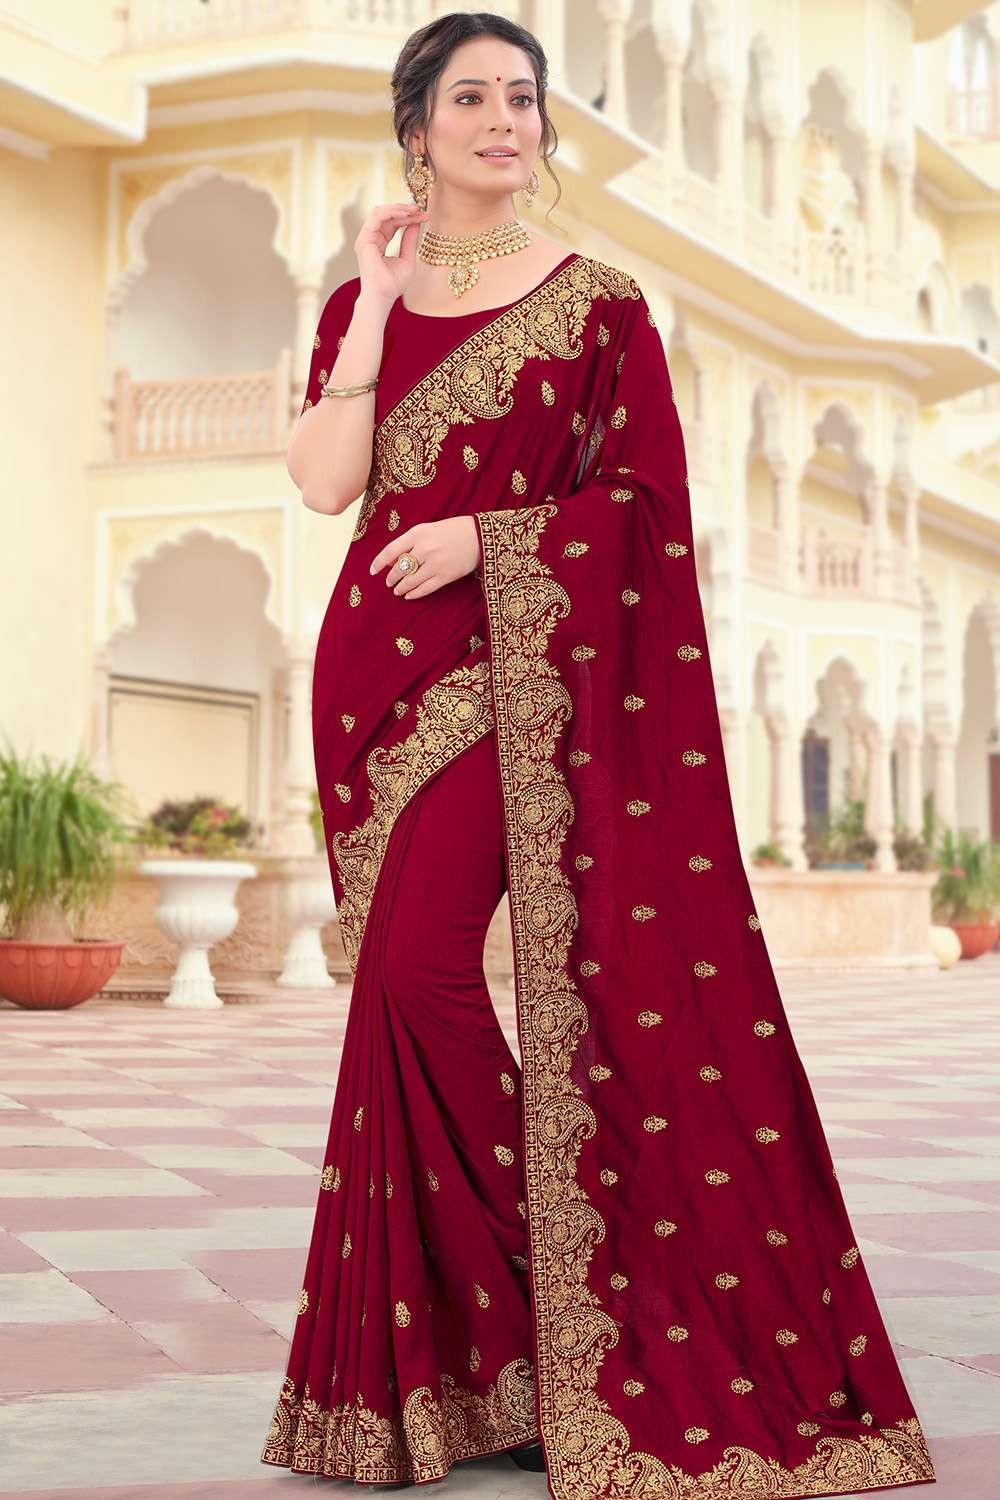 AMOHA 1015891 WOMEN INDIAN READY TO WEAR SAREE TRADITIONAL DESIGNER  COCKTAIL PARTY ONE MINUTE SARI FOR FESTIVAL 3884 - CRAZYCLOTHS